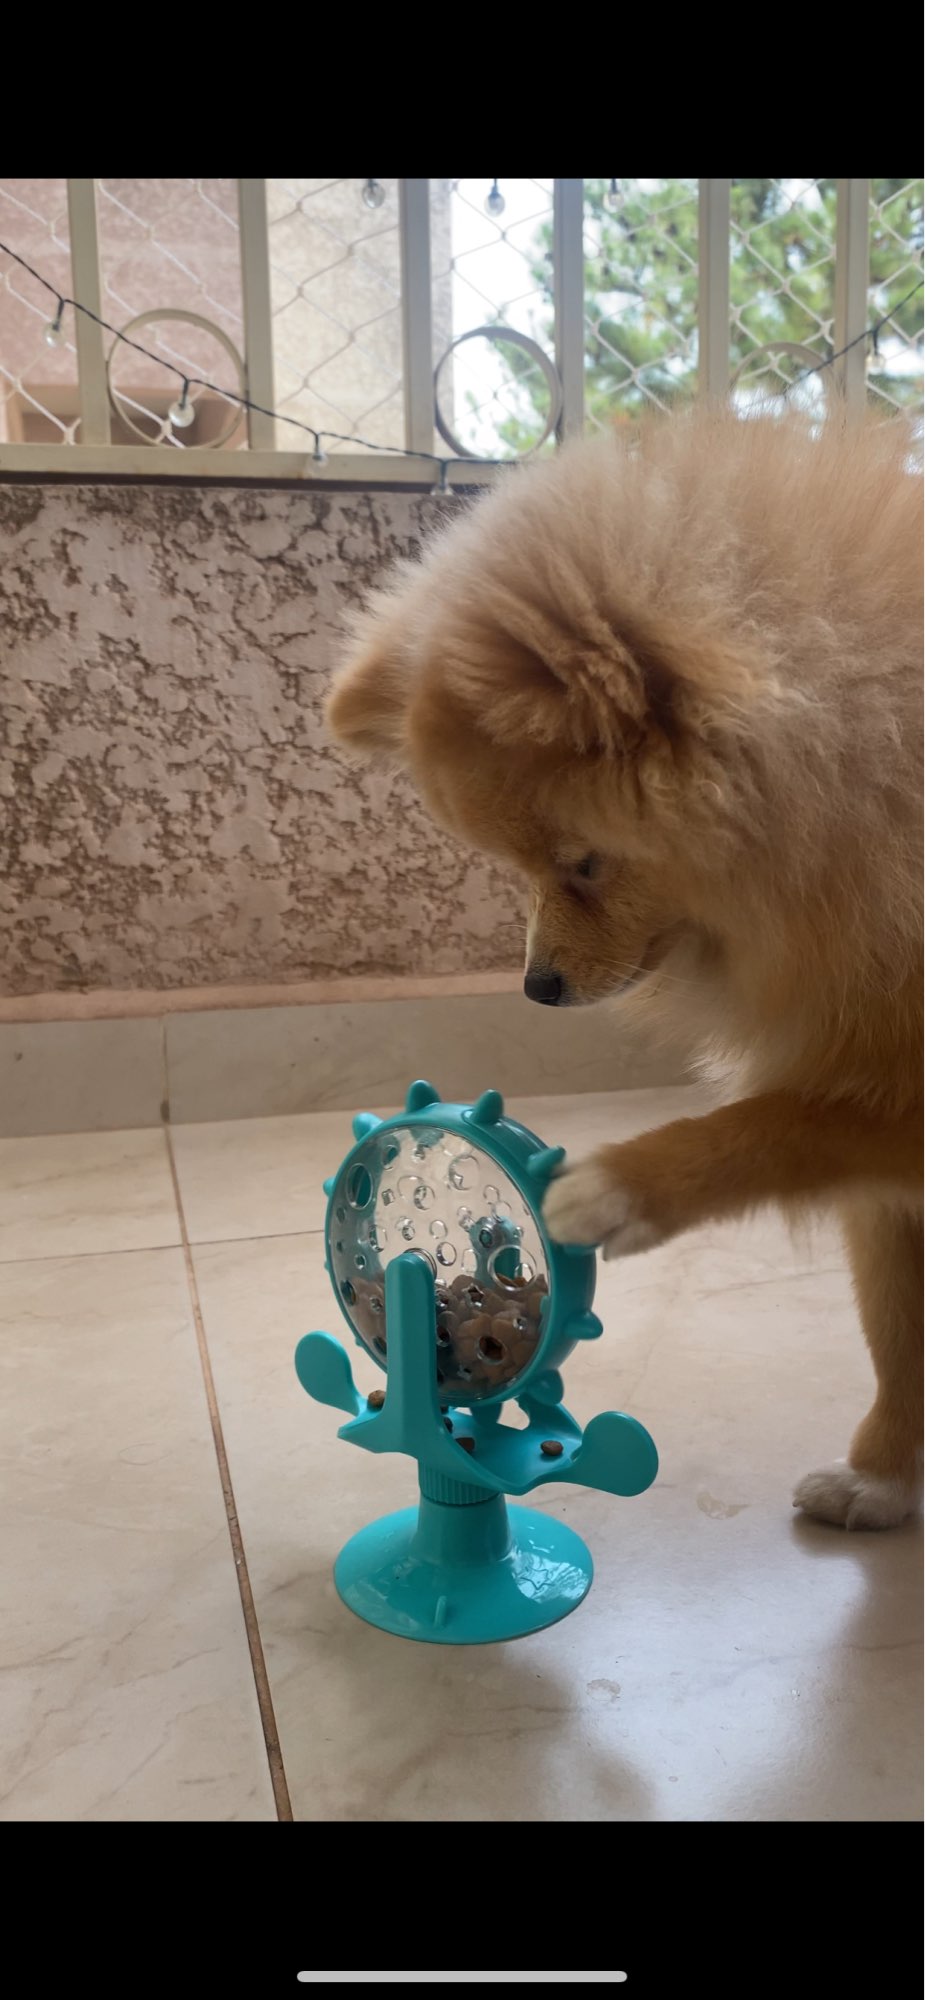 https://katycraftimage.s3.eu-west-2.amazonaws.com/interactive-treat-leaking-toy-for-small-dogs-original-slow-dog-feeder-funny-dog-wheel-pet-products-accessories-86234097-343875-review-I7YB8WXZOR.jpg